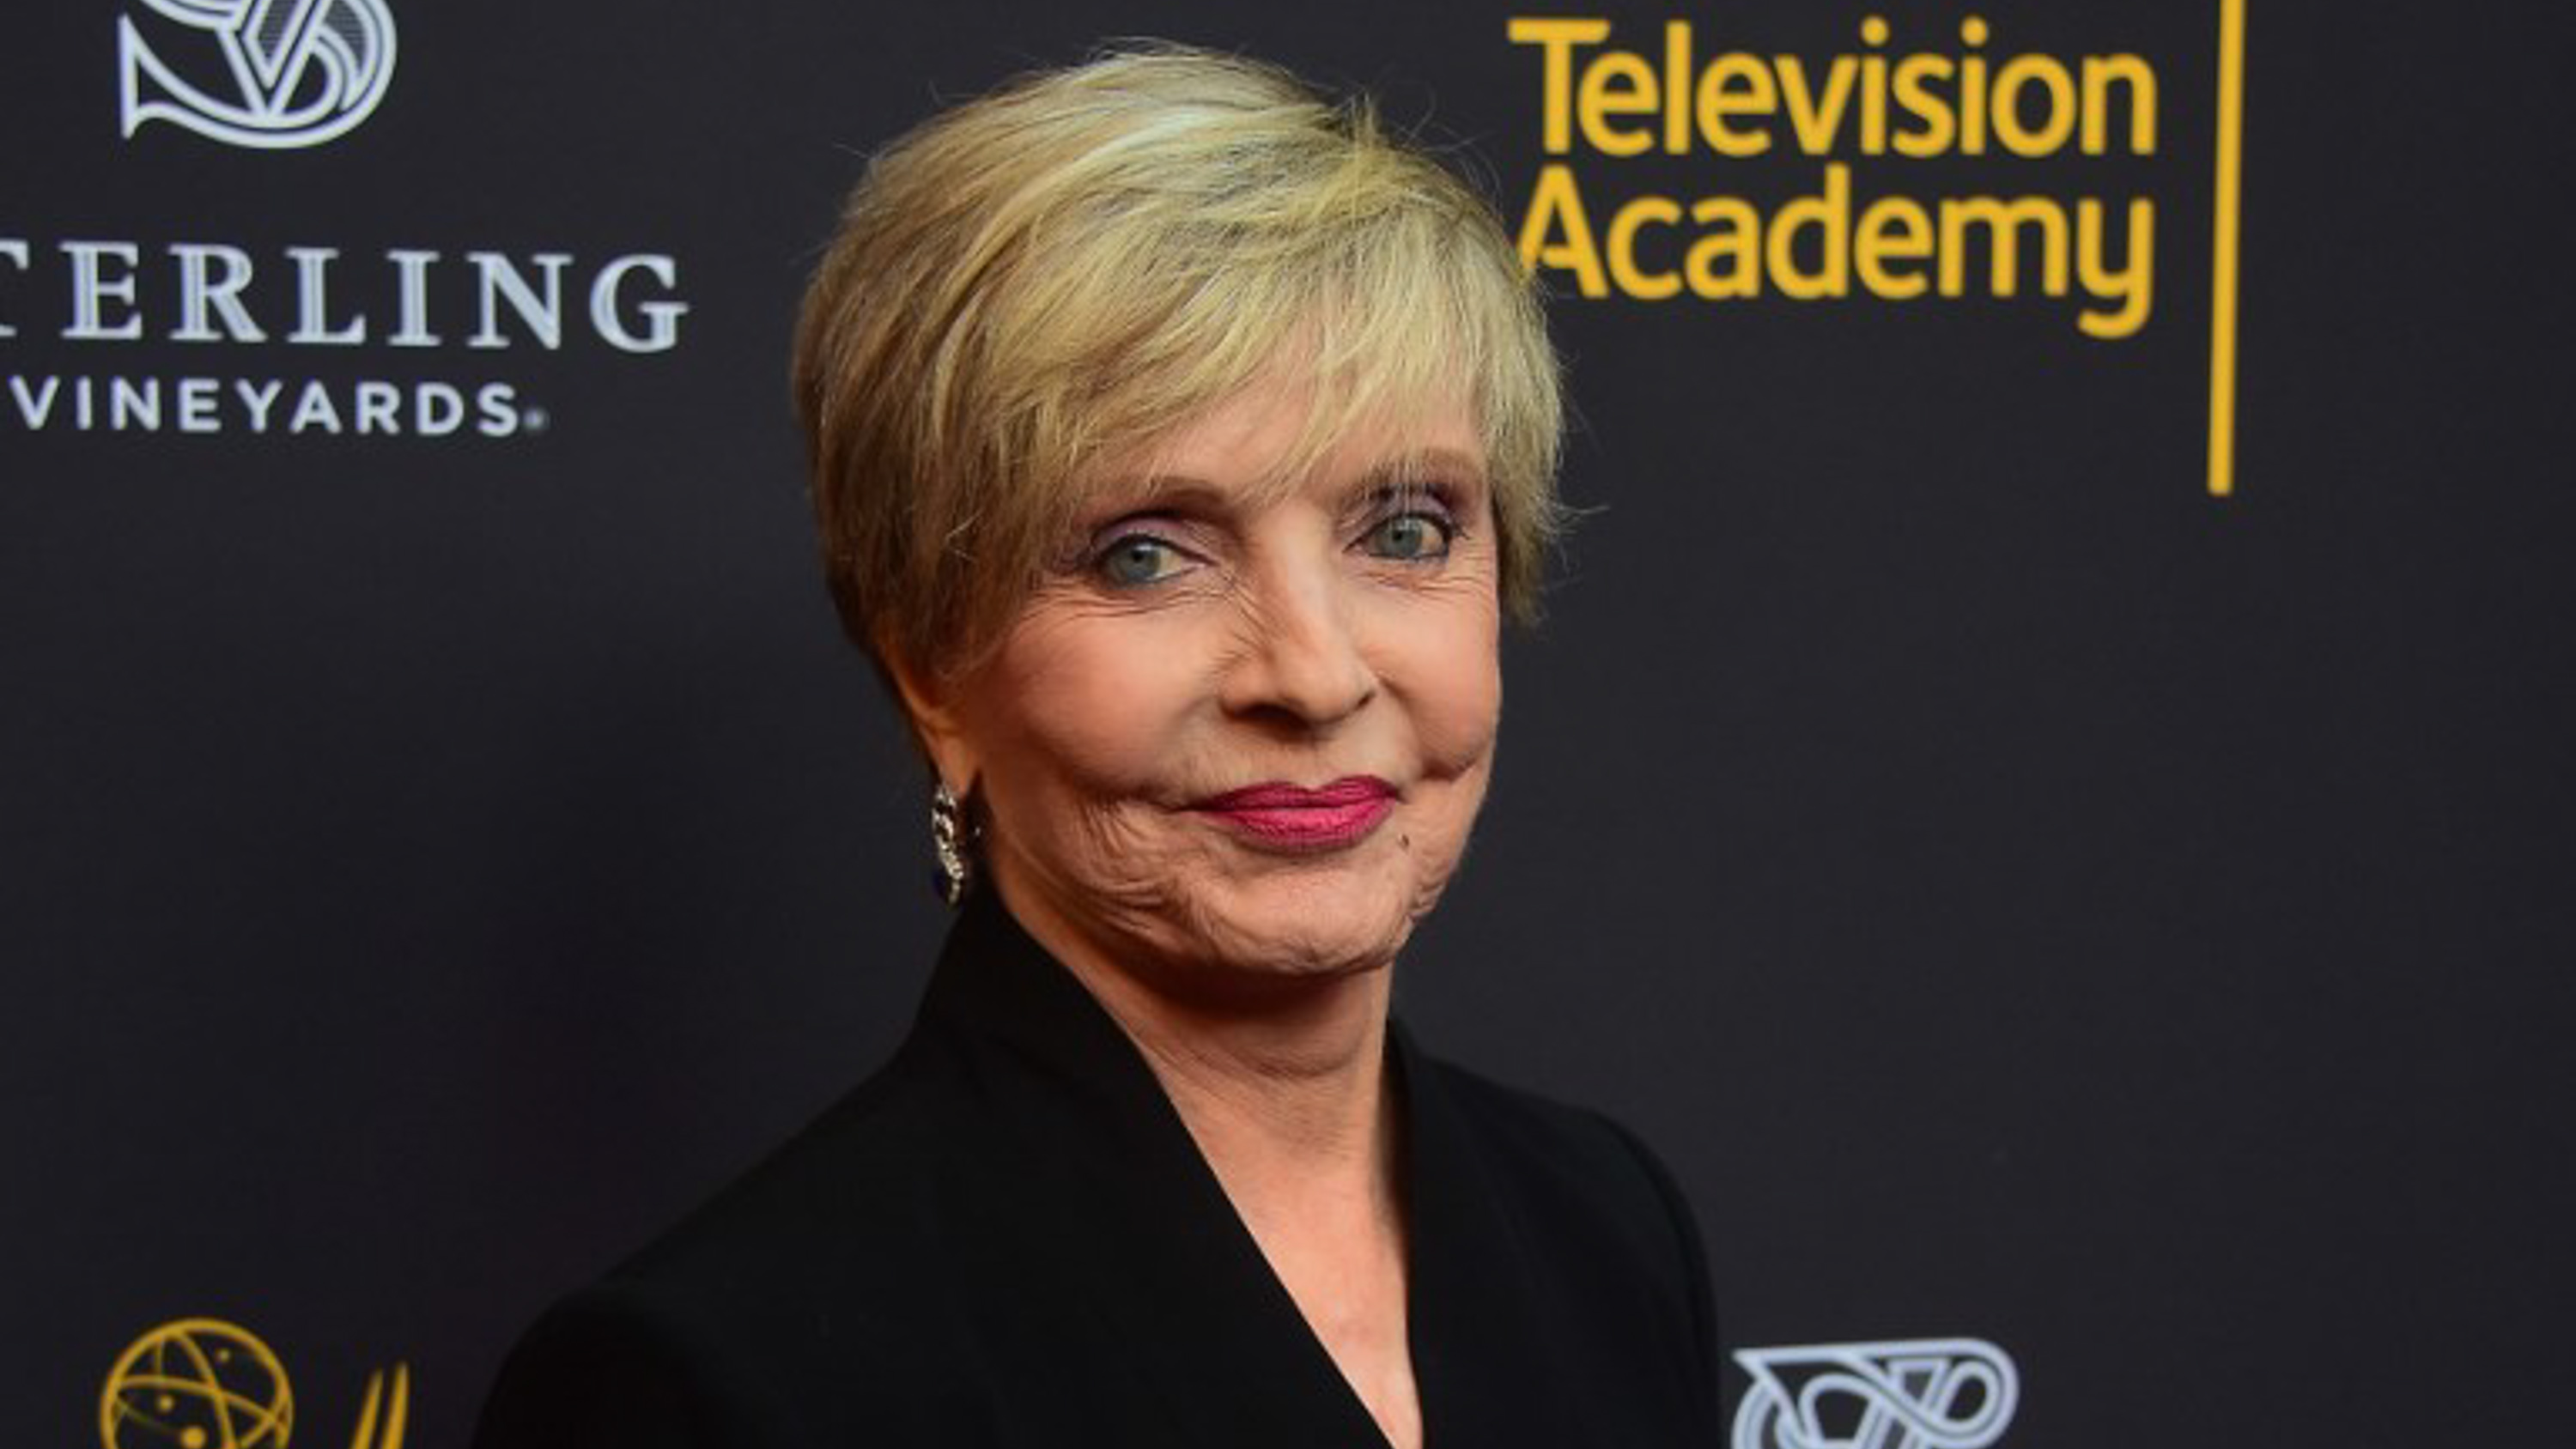 FLORENCE HENDERSON. Florence, best known for her role as Carol Brady in 'The Brady Bunch,' dies at 82. File photo shows the actress at the Television Academy's Performers Peer Group Celebration on August 22, 2016 in Beverly Hills, California. Photo by Frederic J. Brown/AFP PHOTO 